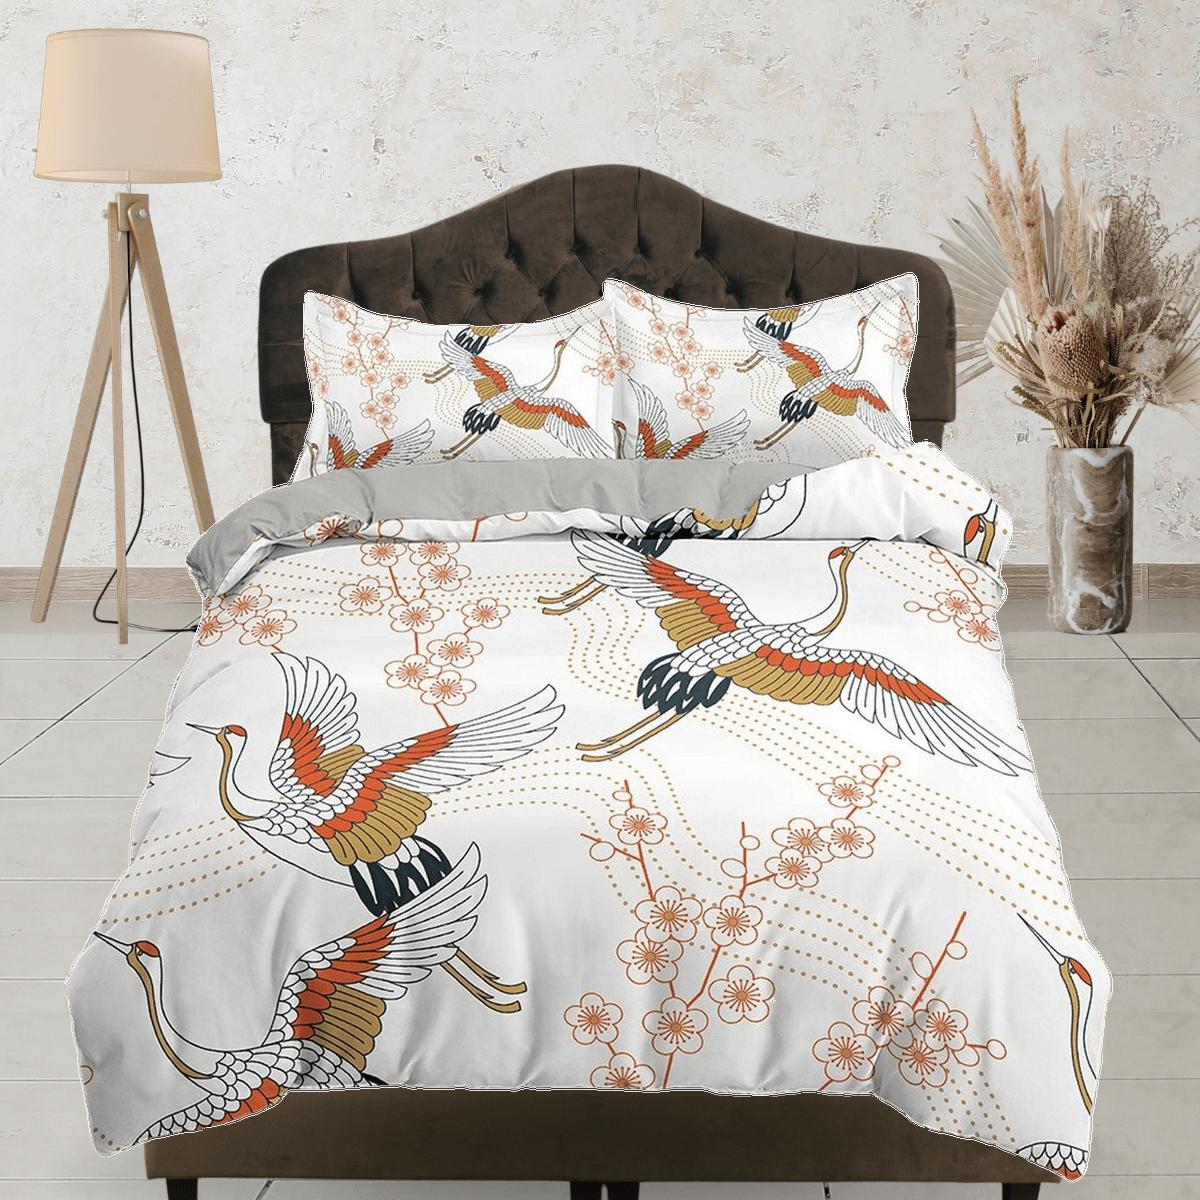 daintyduvet White oriental bedding with floral prints crane bird design, Asian duvet cover set with cherry blossom, Japanese bedding, King, Queen, Full